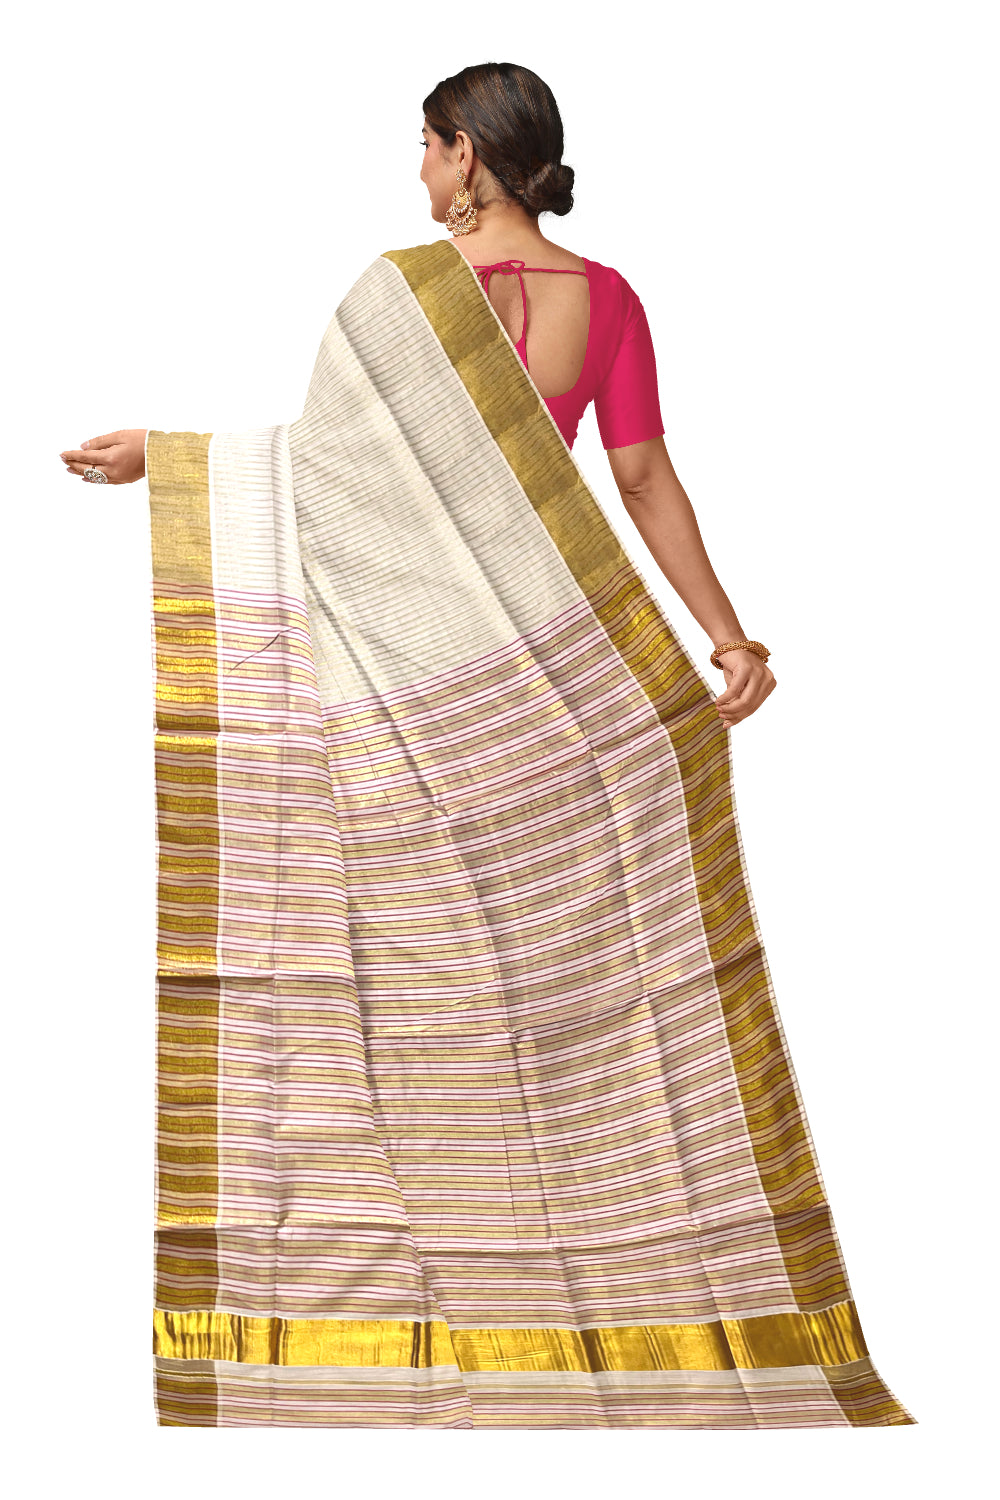 Pure Cotton Kerala Kasavu Saree with Lines Designs on Body and Red Lines on Munthani